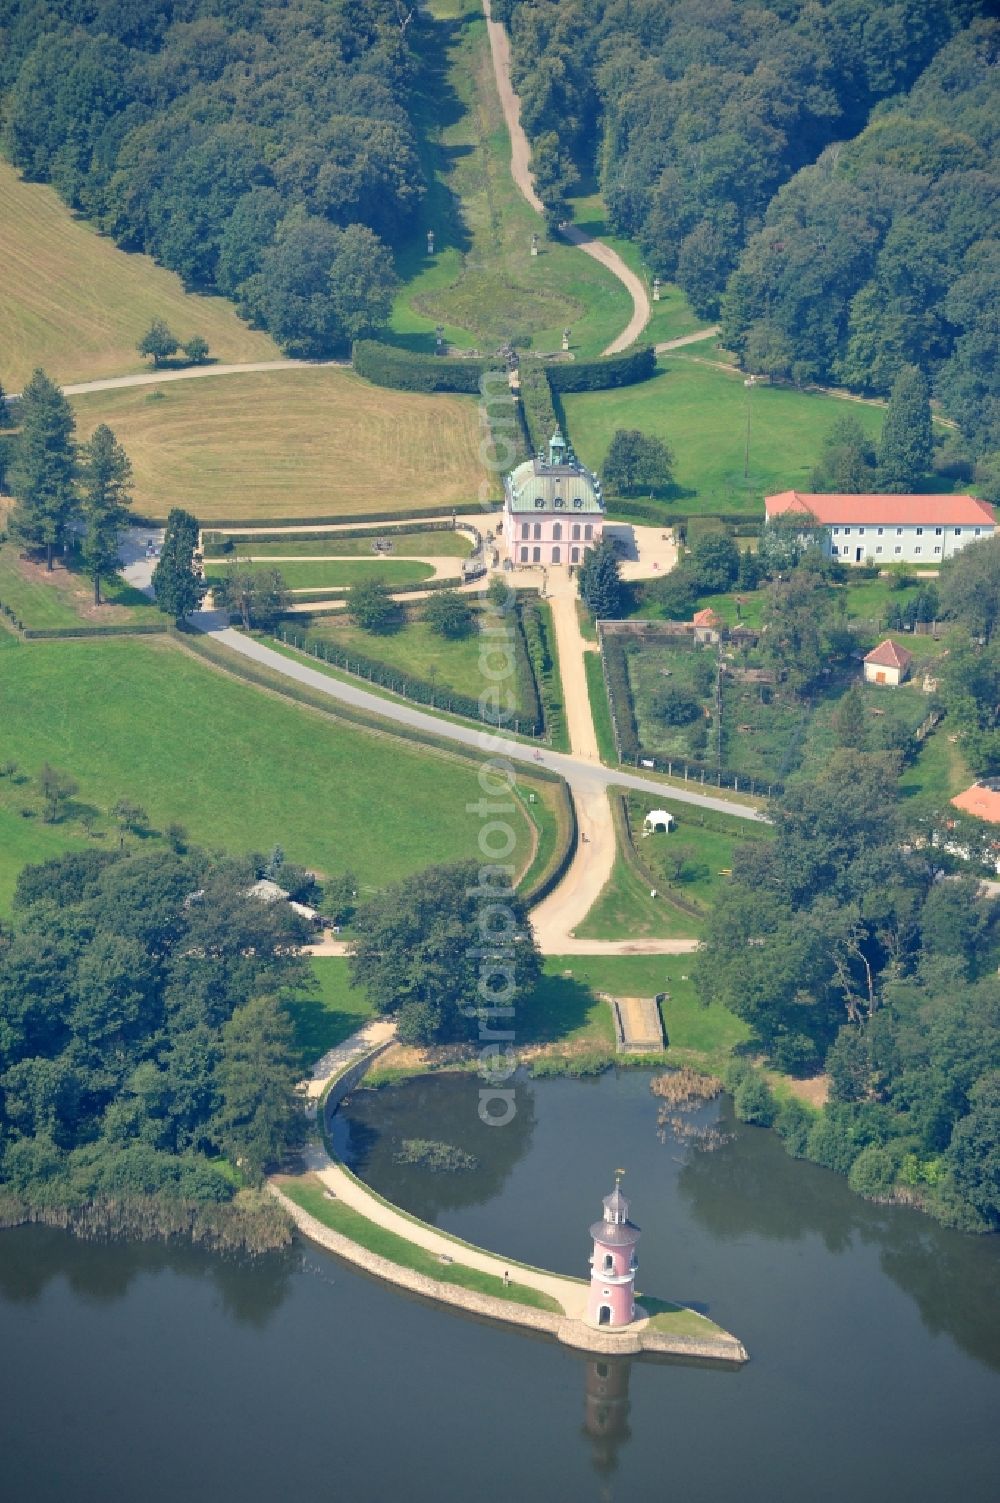 Moritzburg from above - View of the Pheasant castle at the castle pond in the small town Moritzburg in Saxony.The Pheasant castle is located in the 1728 built pheasant scale and is now a museum